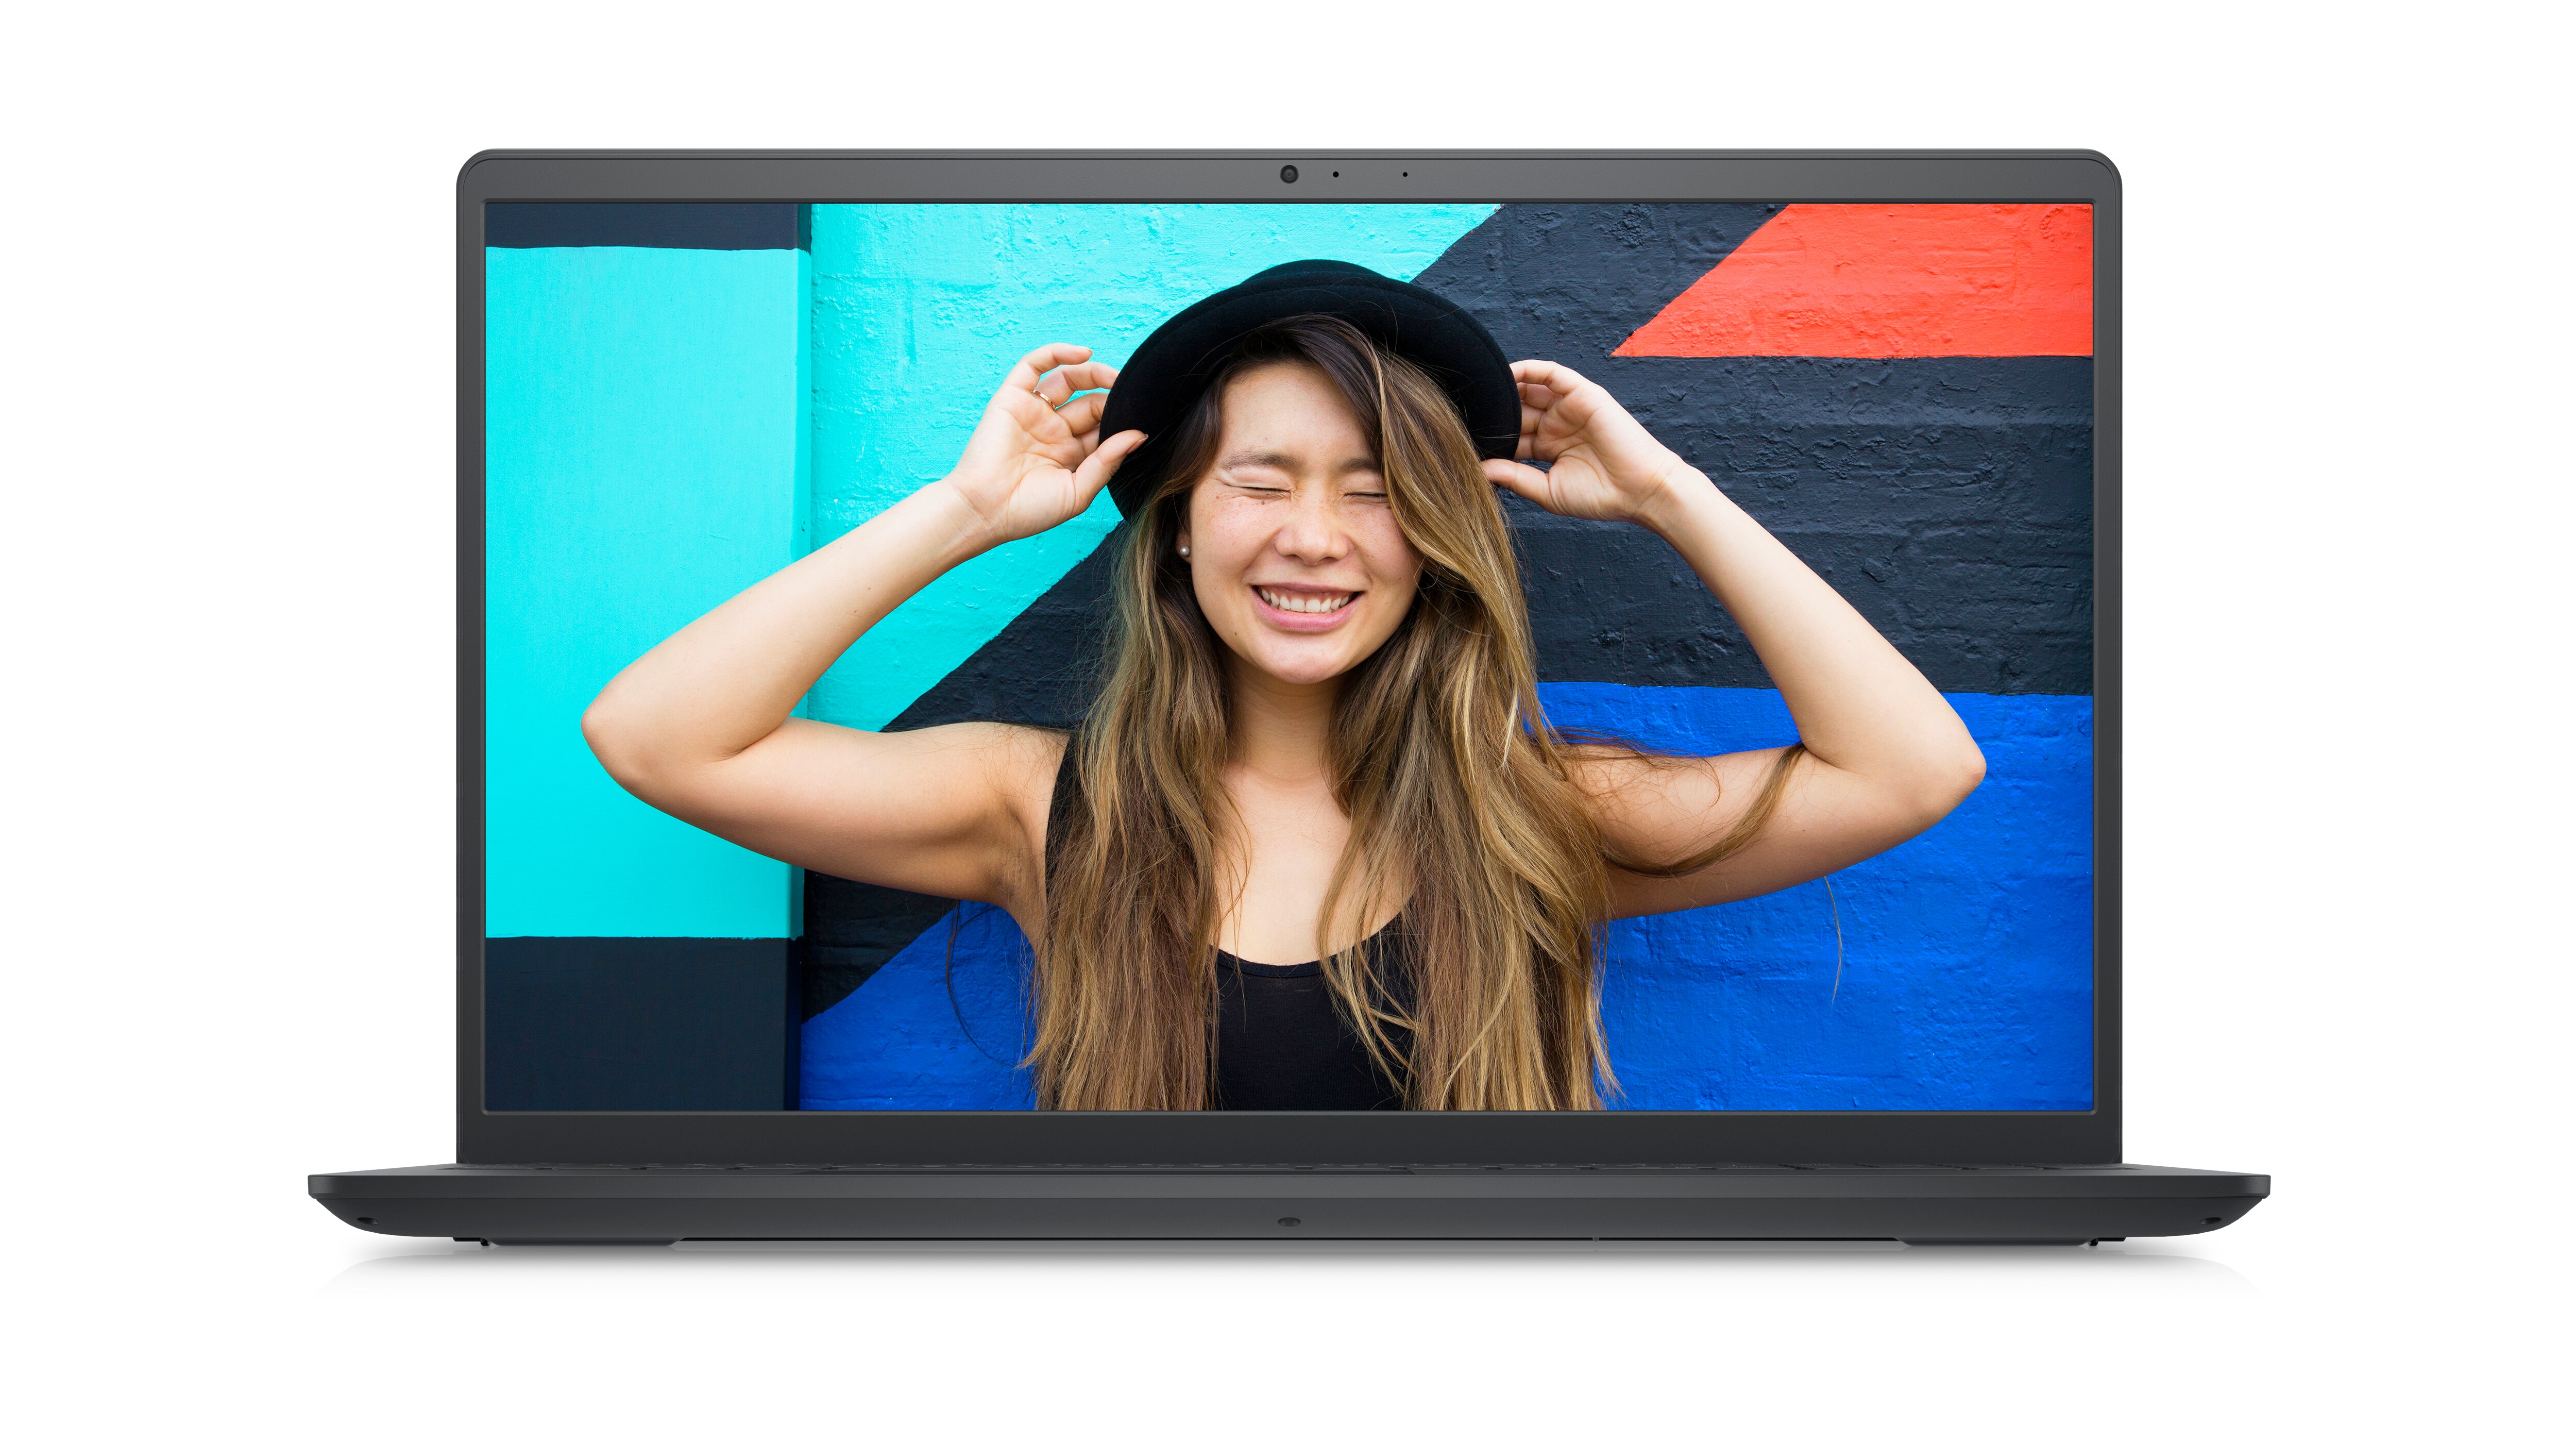 Picture of a Dell Inspiron 15 3521 Laptop with a smiley girl wearing a black hat and t-shirt on the screen.